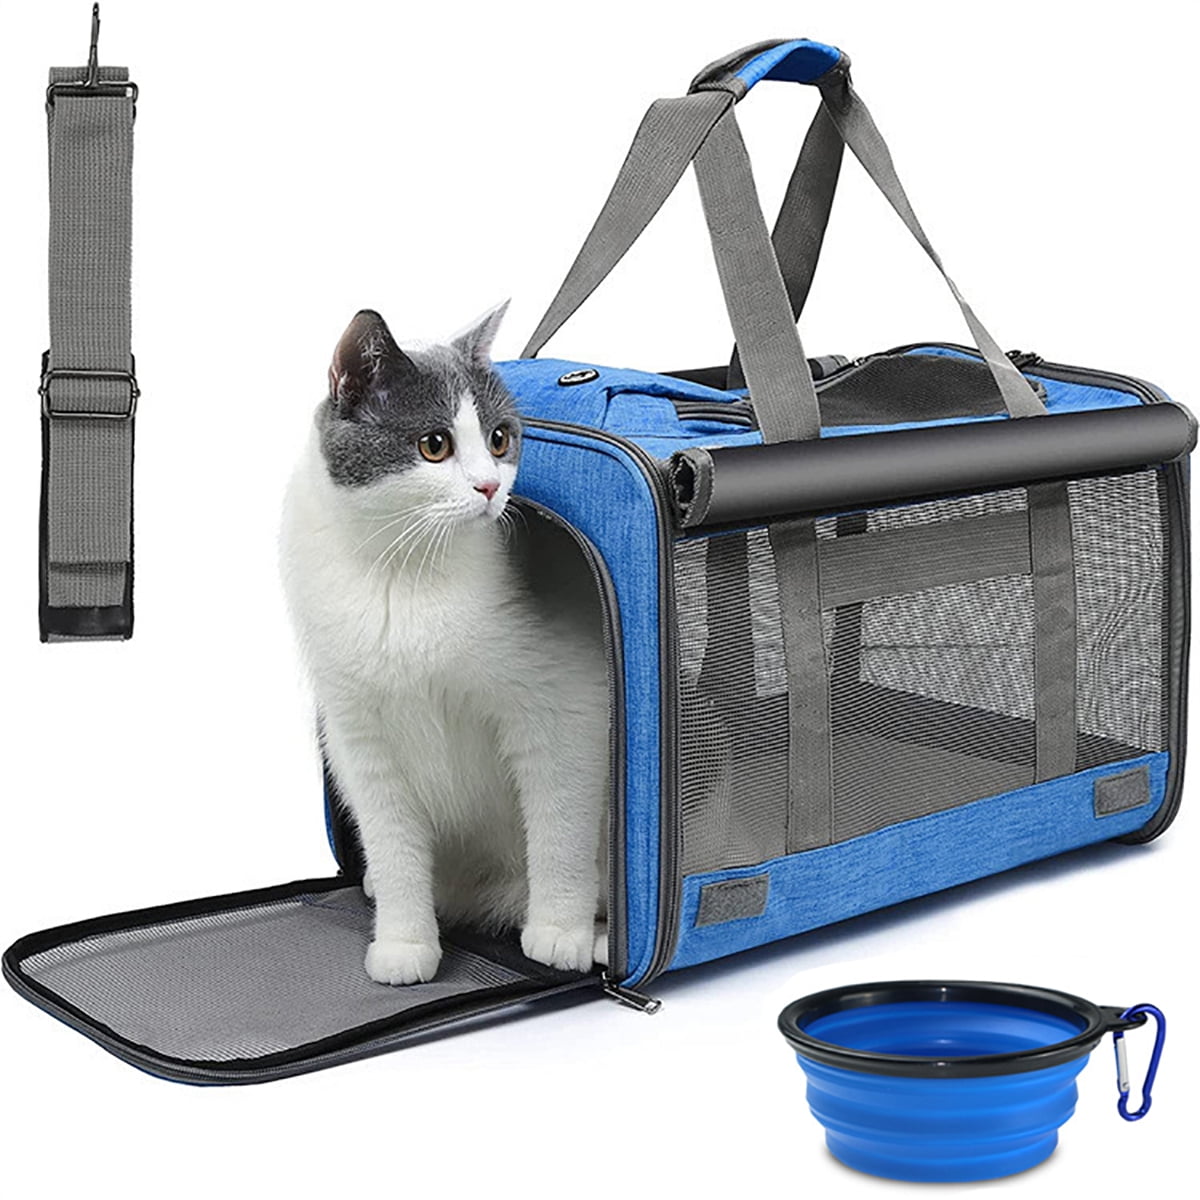 Cat Carrier Pet Large Cat Carrier for Small Medium Dogs Cats under 25lbs  with a Bowl, Mat, TSA Airline Approved 